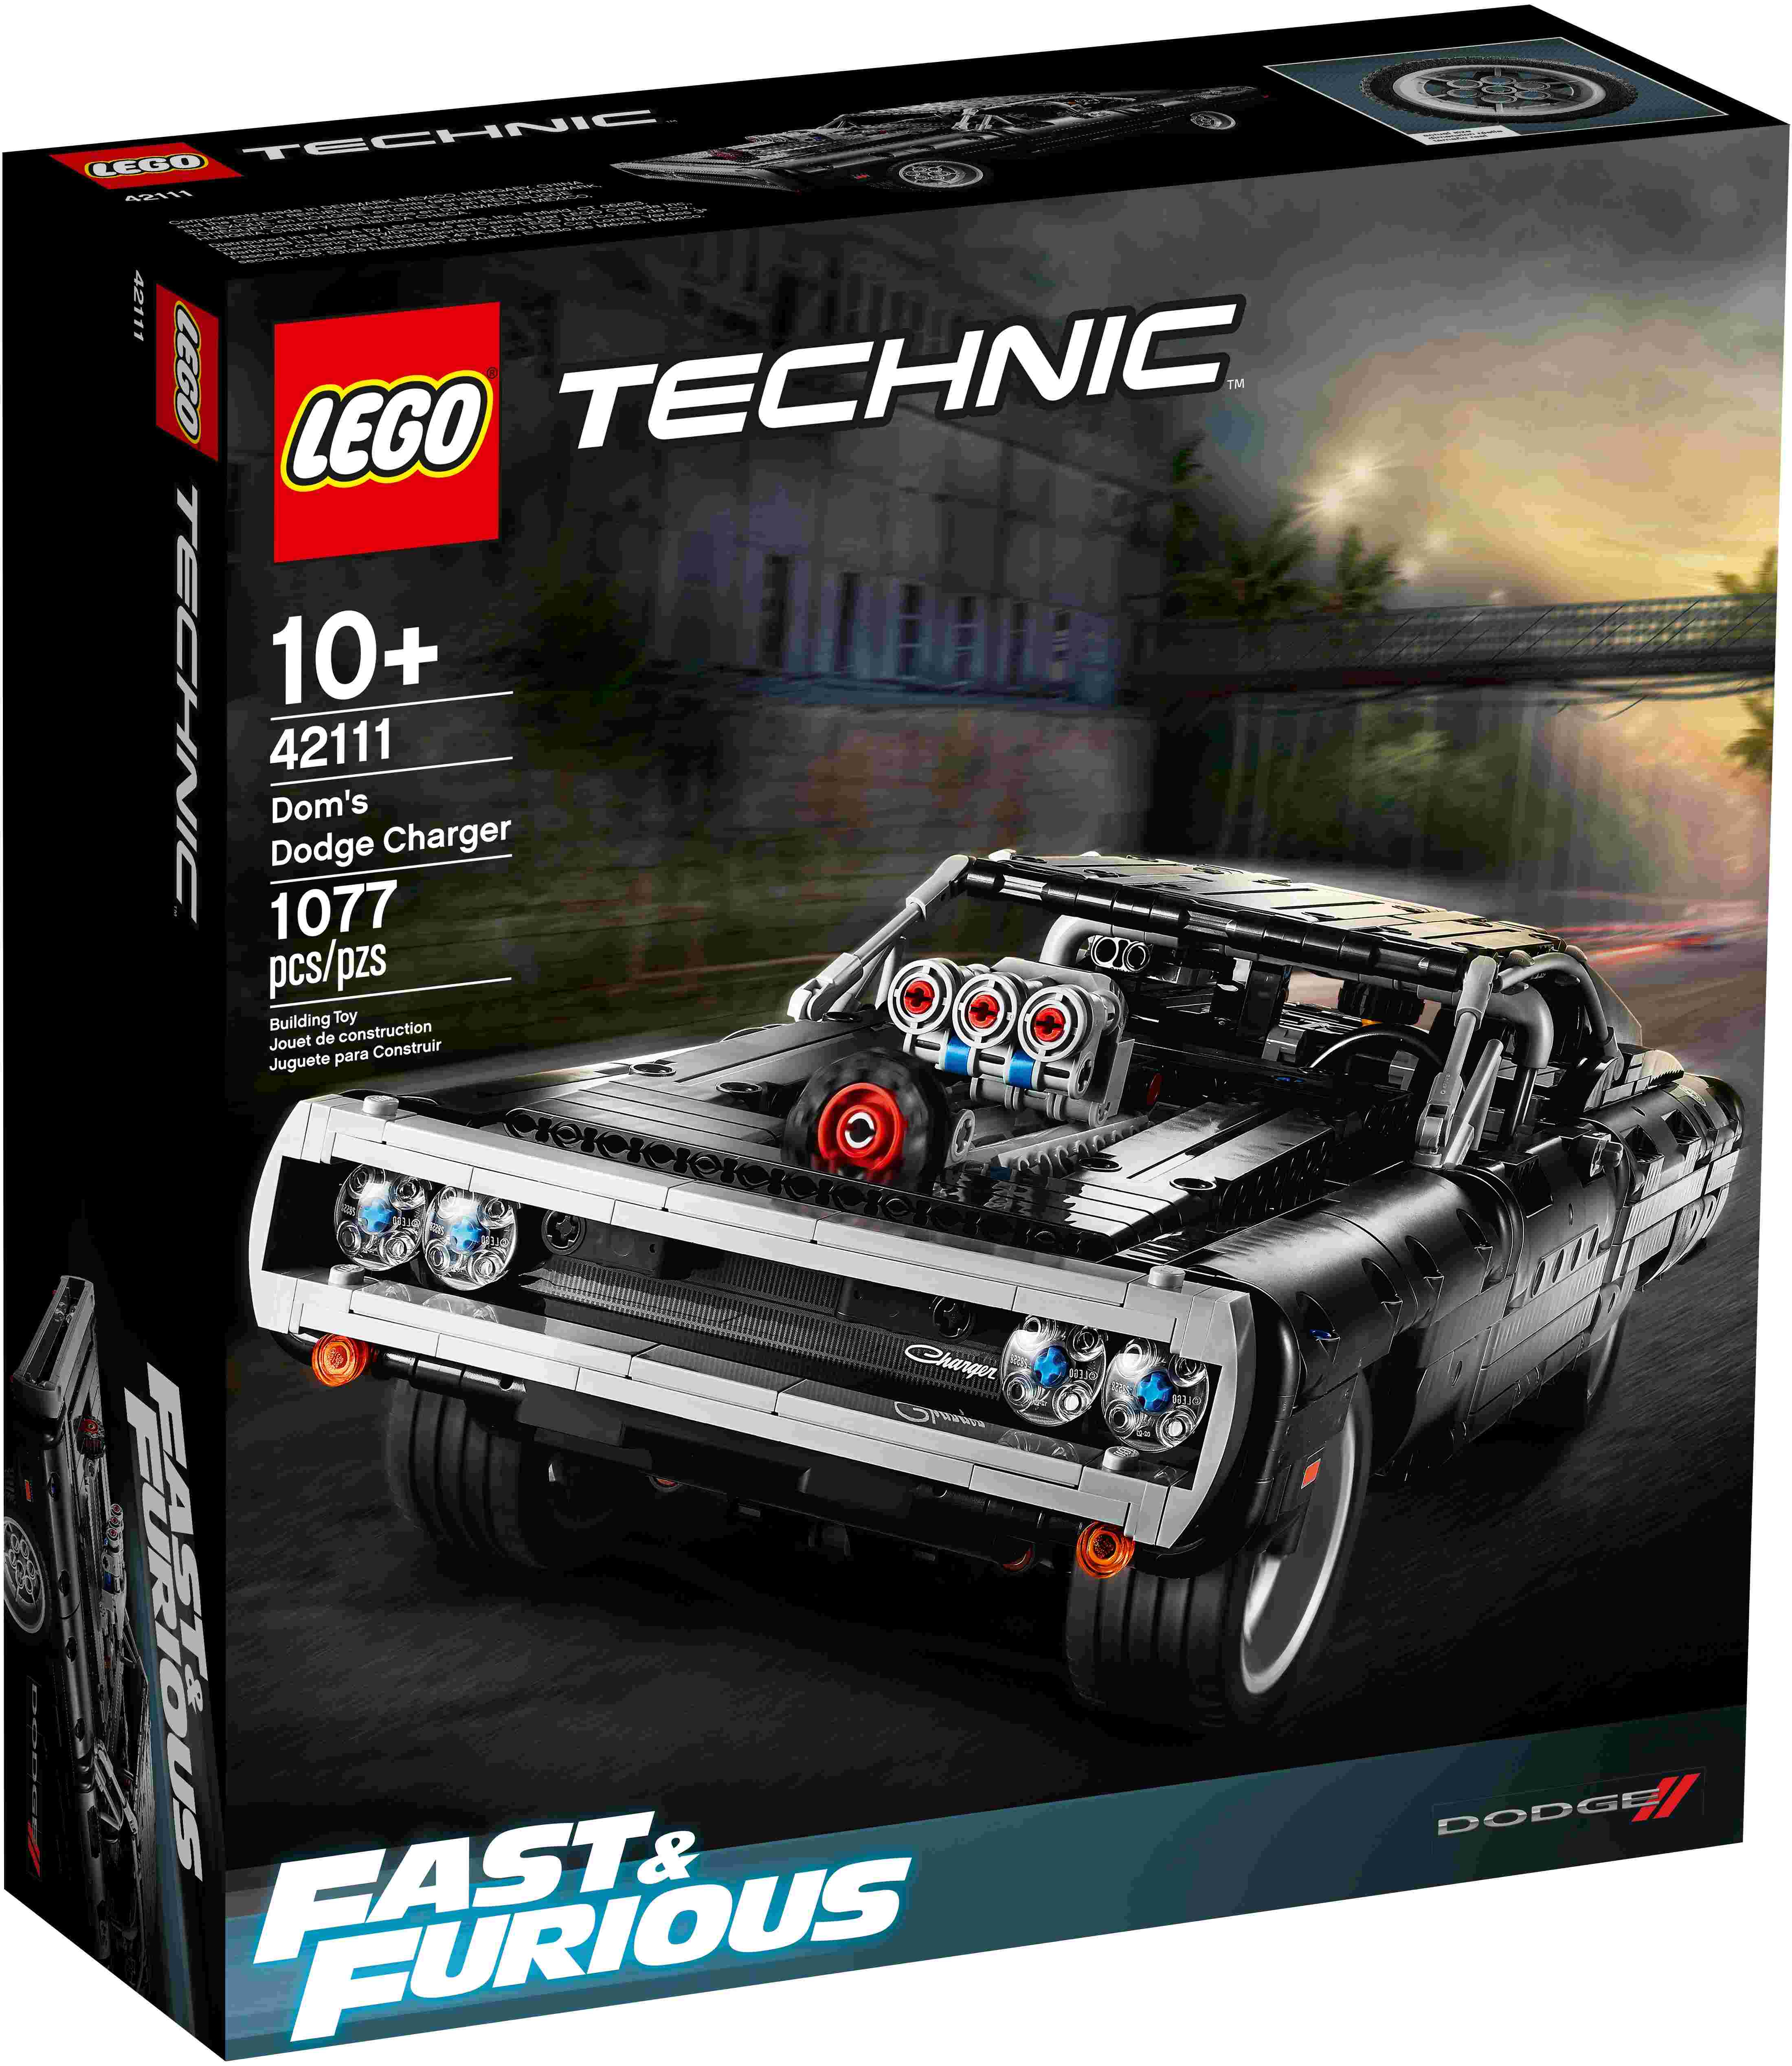 LEGO 42111 Technic Doms Dodge Charger, Fast and Furious Modellauto Rennwagen